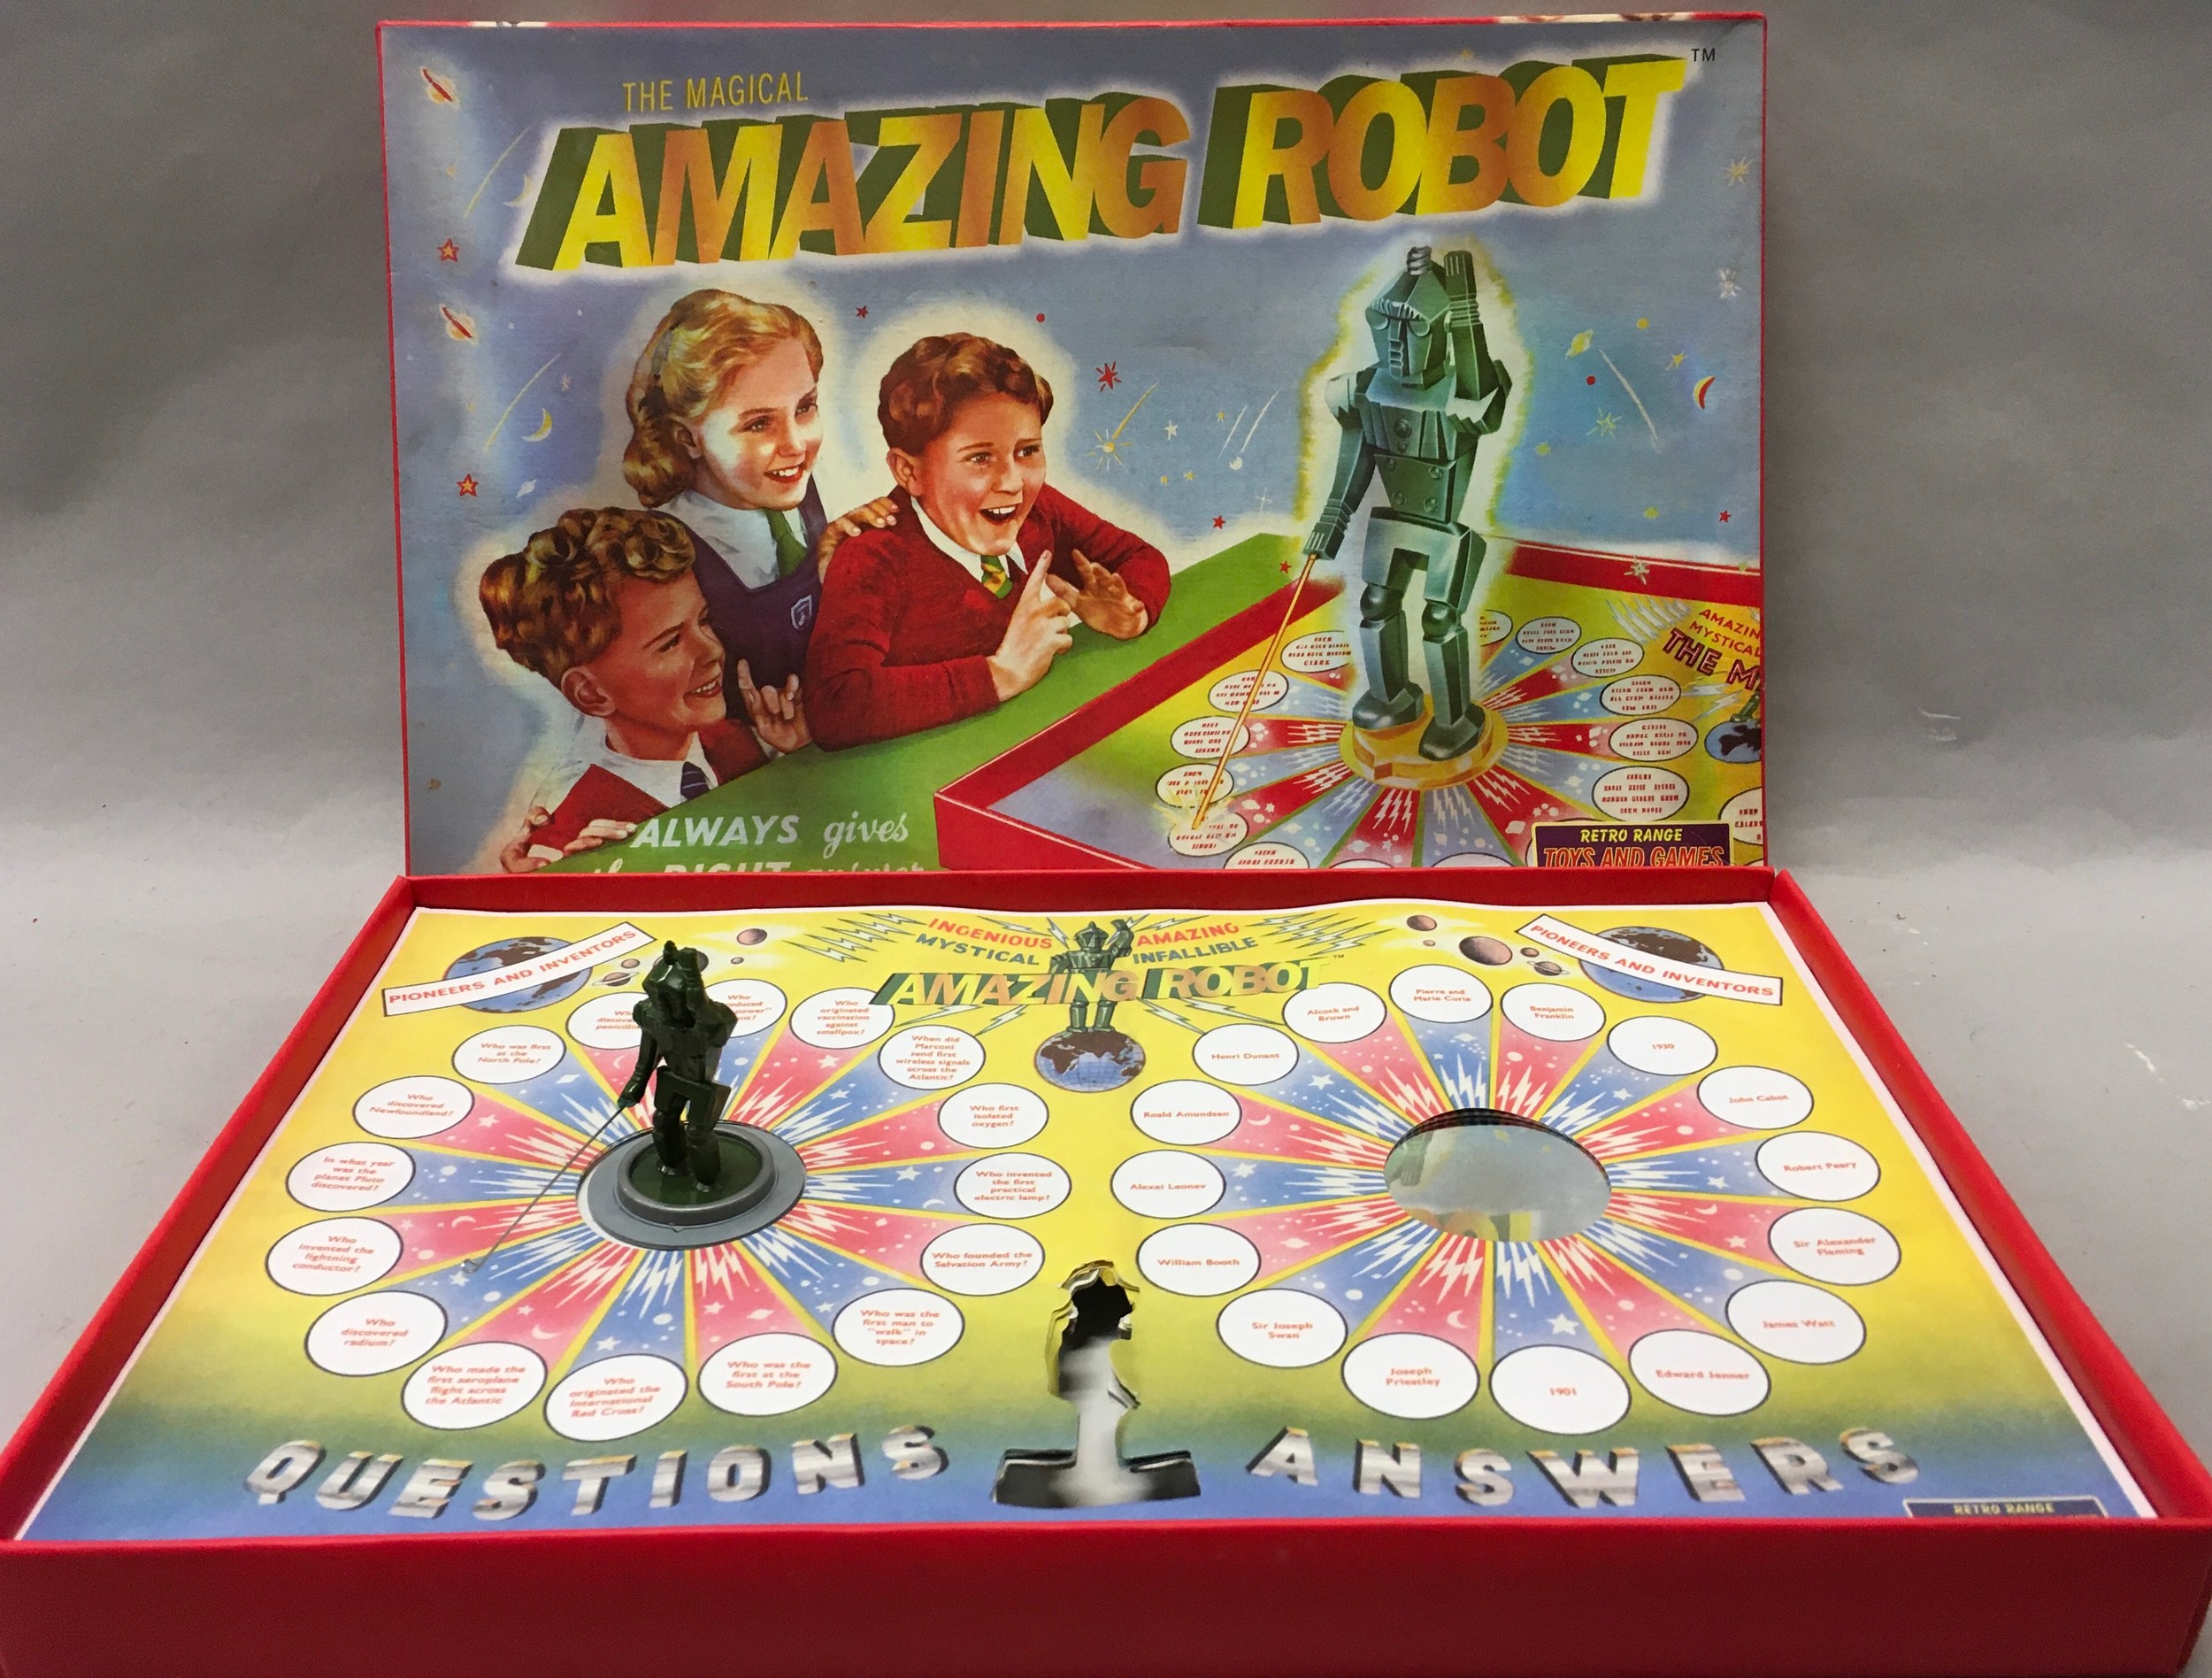 Collection of vintage jigsaw puzzles complete with boxed amazing robot game. - Bild 4 aus 4